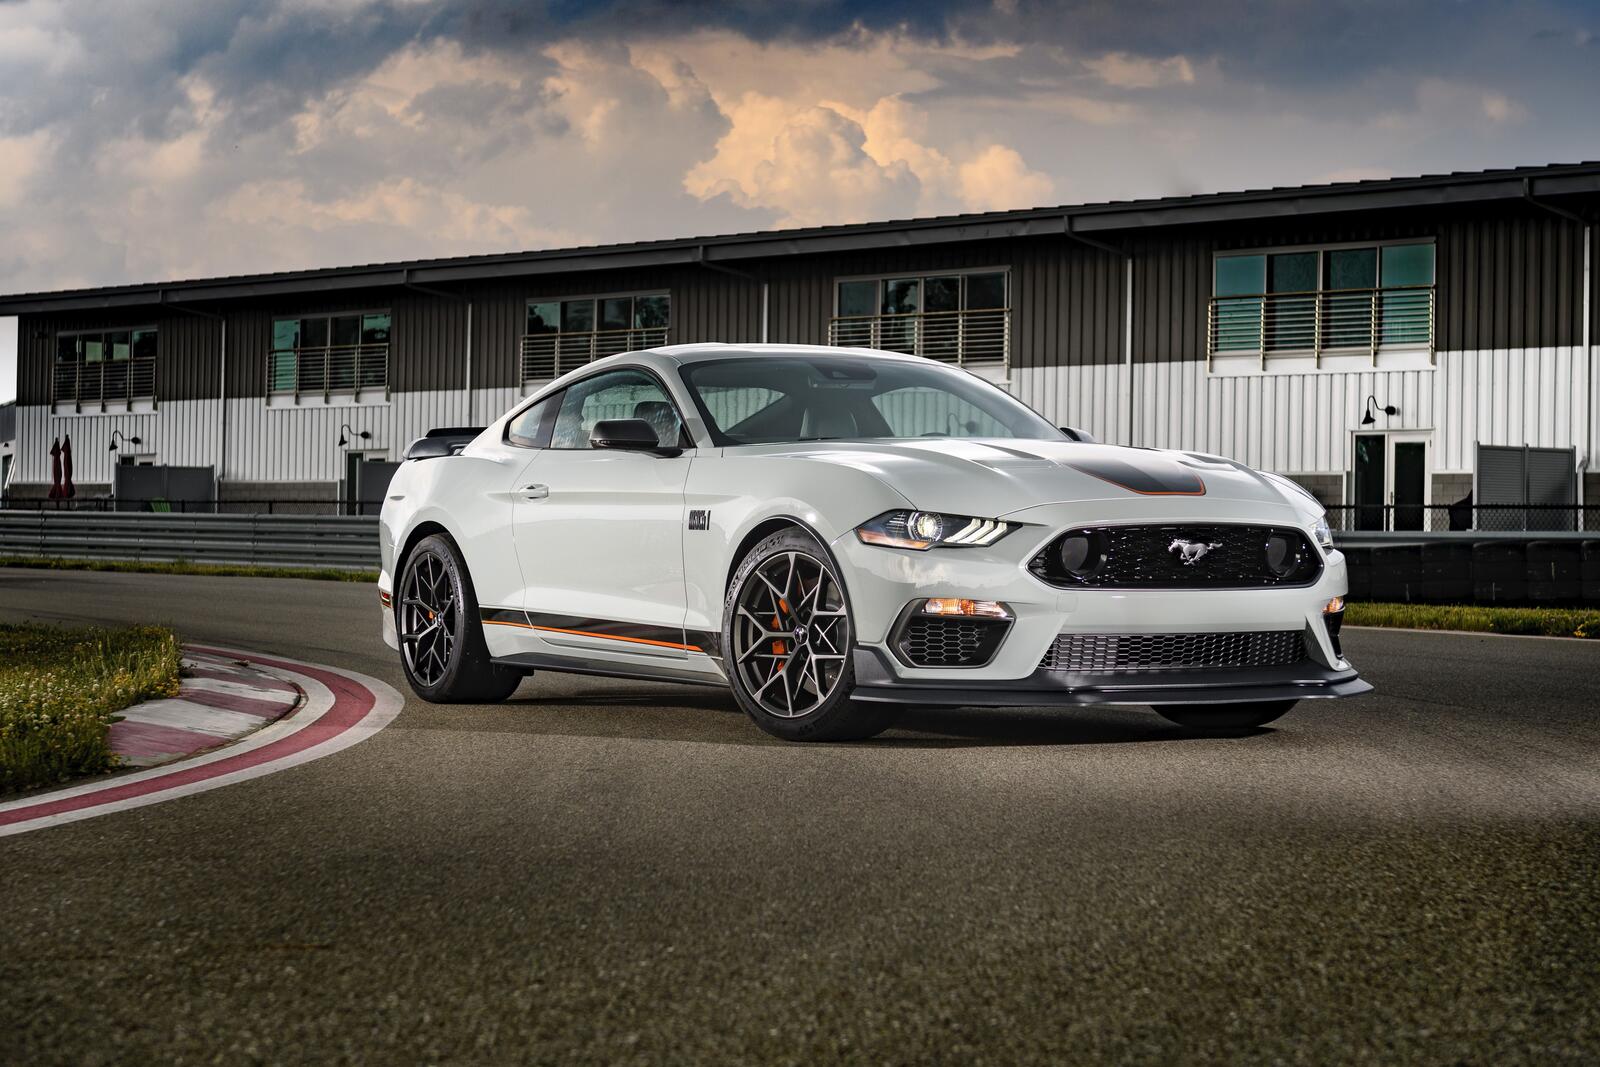 Wallpapers Ford Mustang white car on the desktop